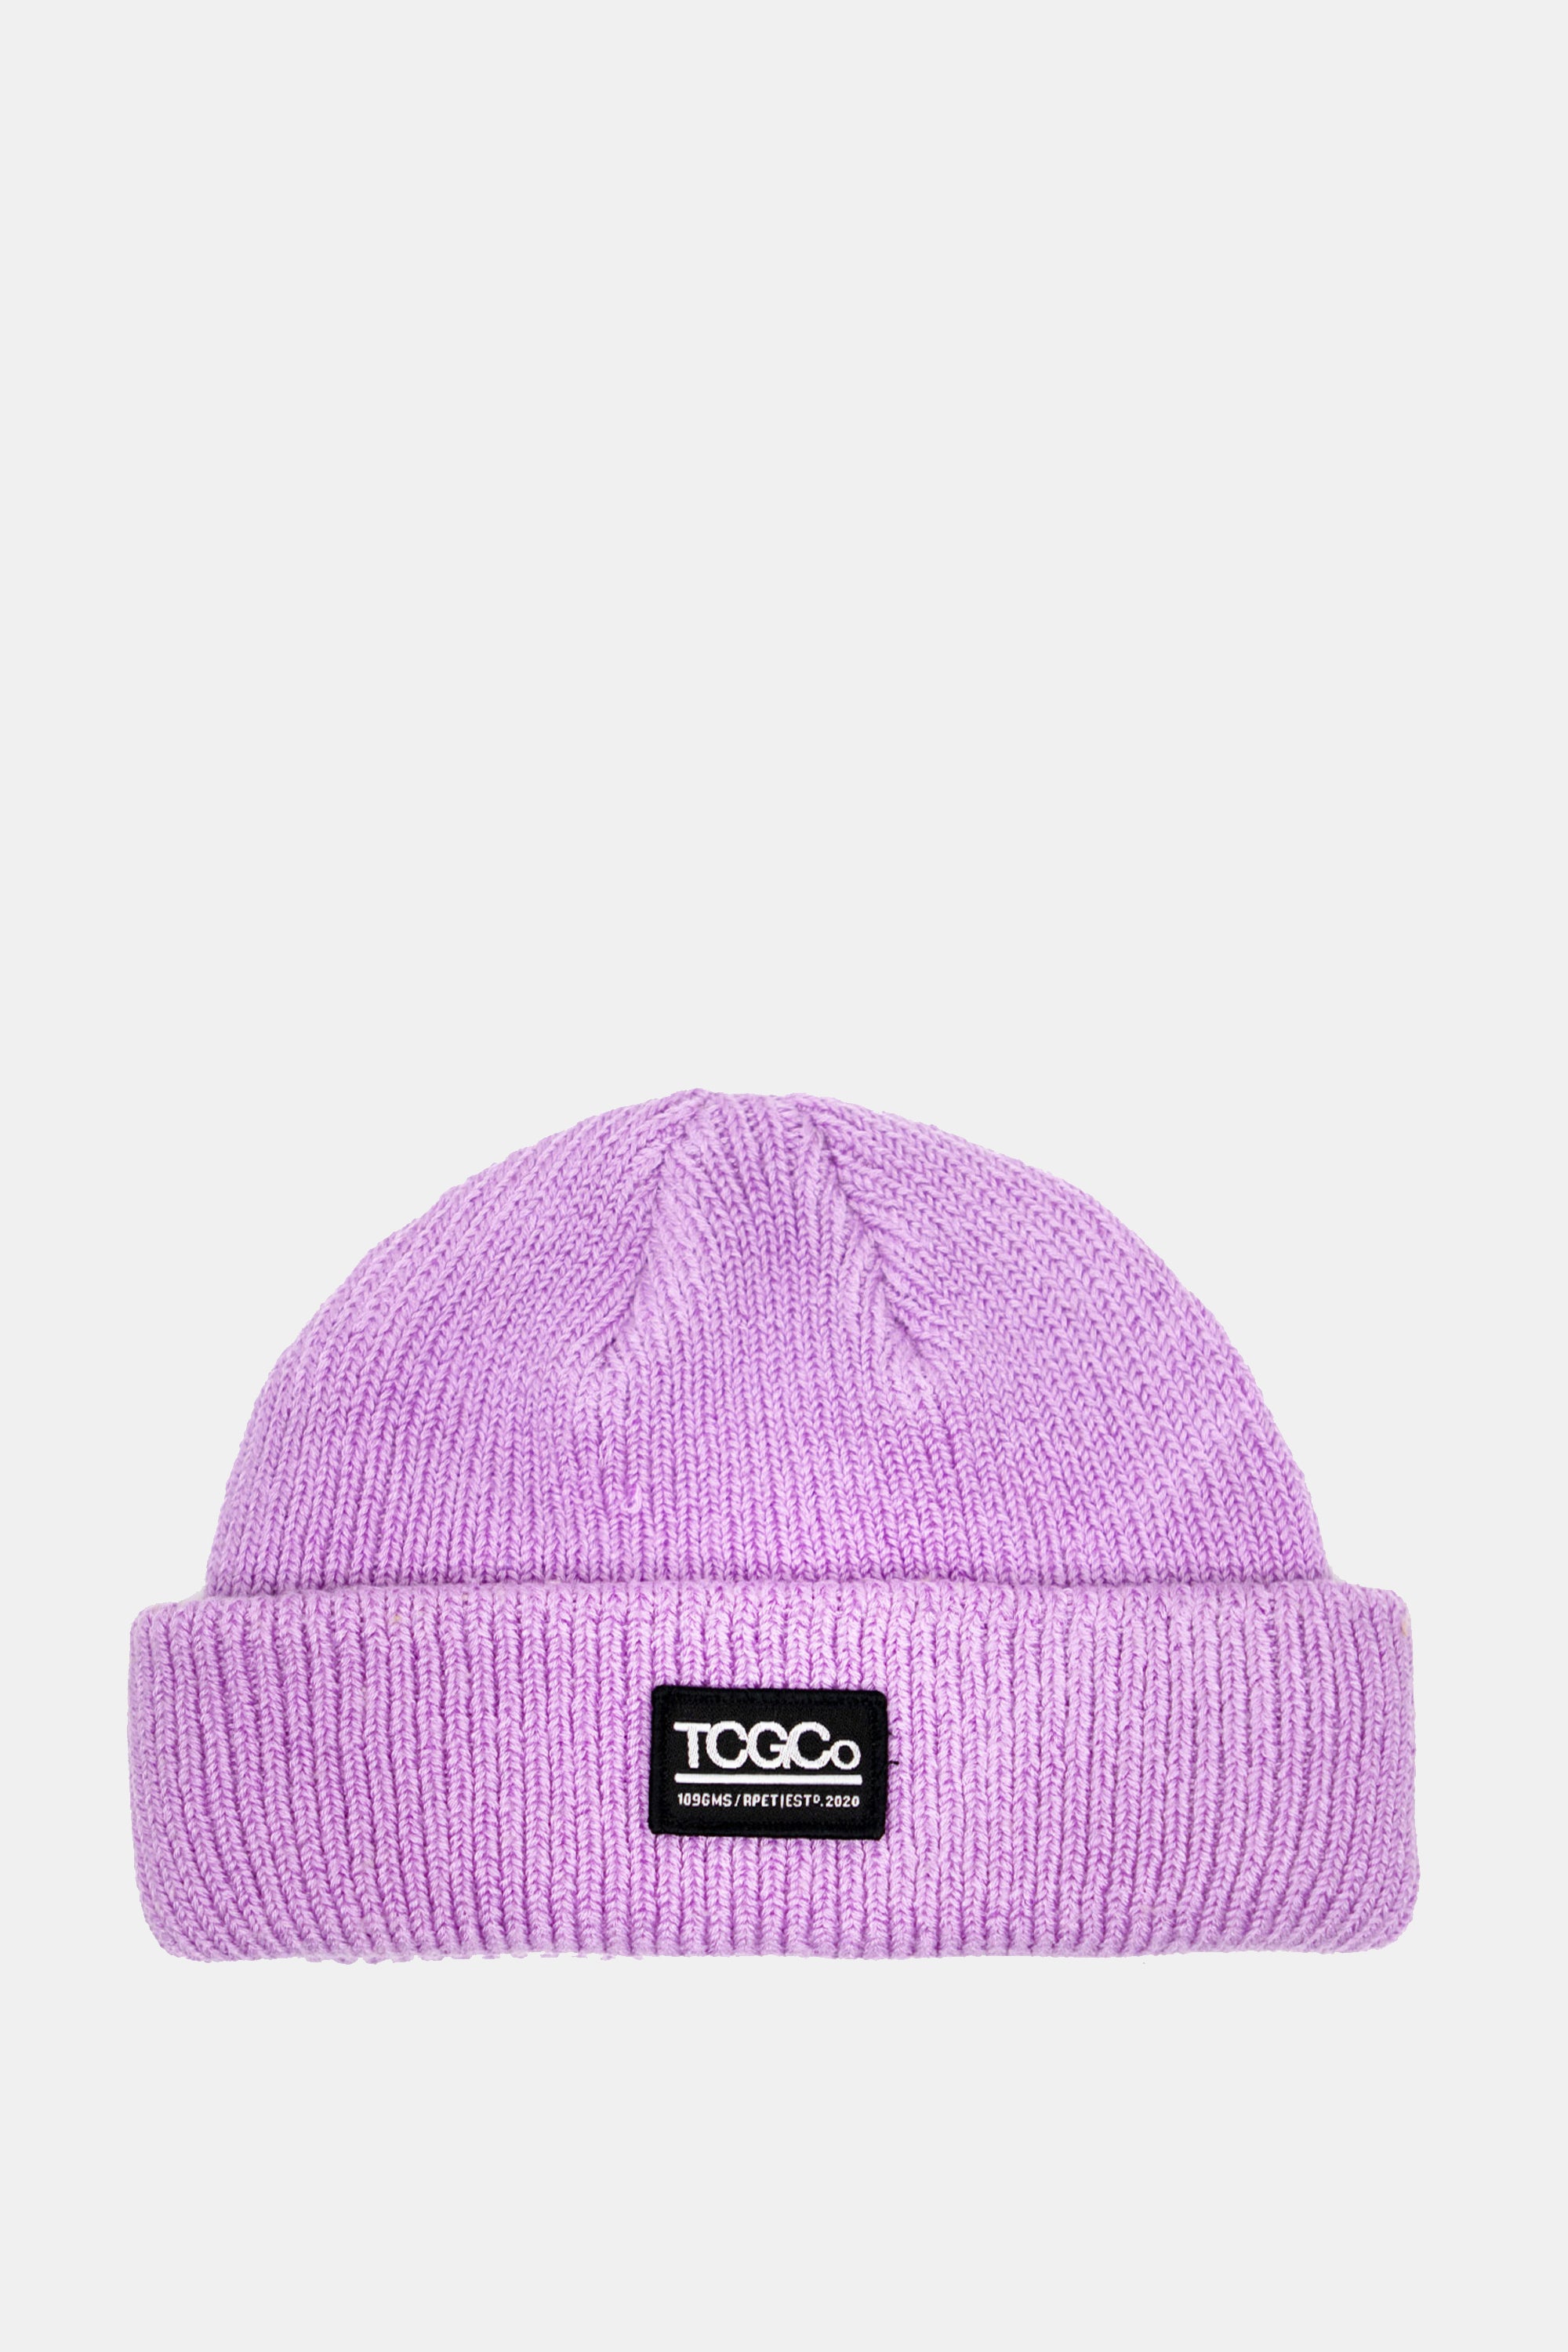 Rex - 100% Recycled Beanie Lilac